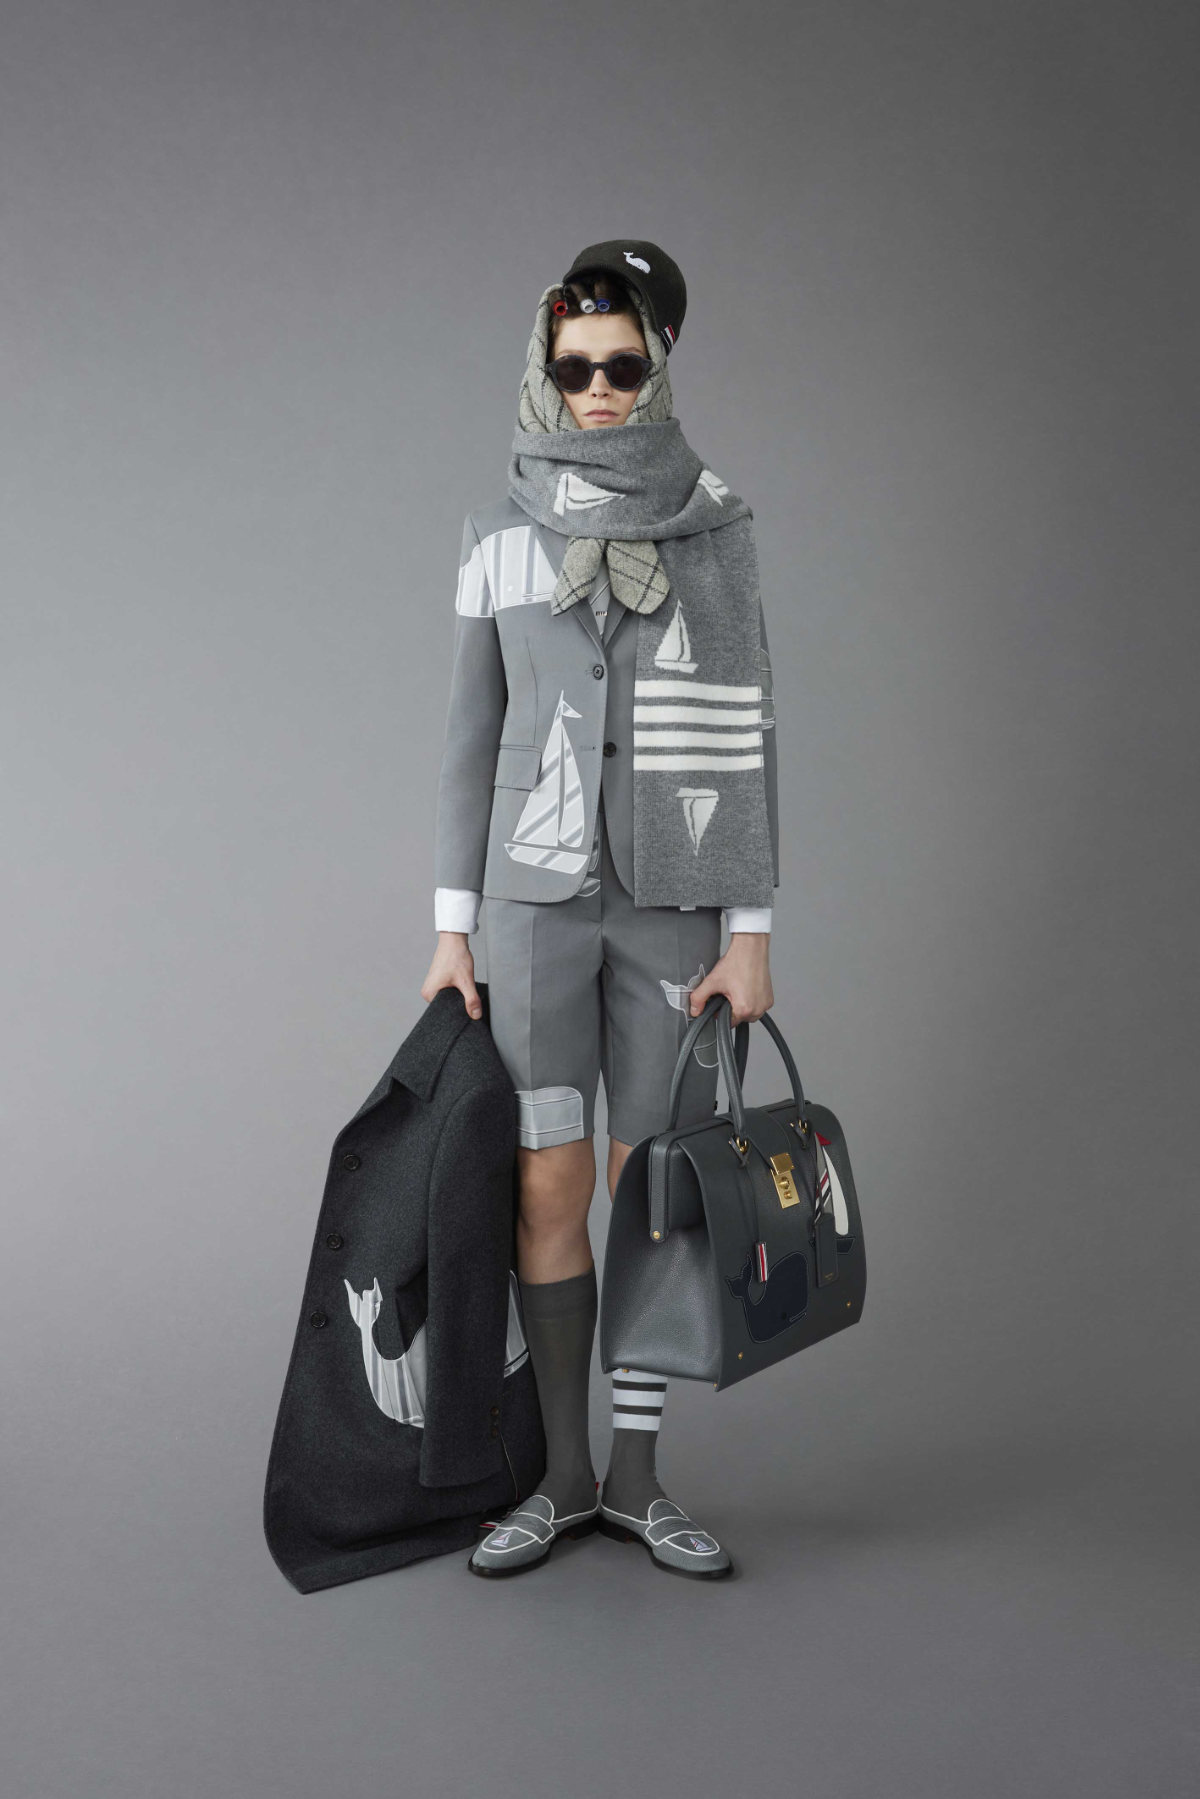 Thom Browne Presents His New Women's Fall 2023 Collection